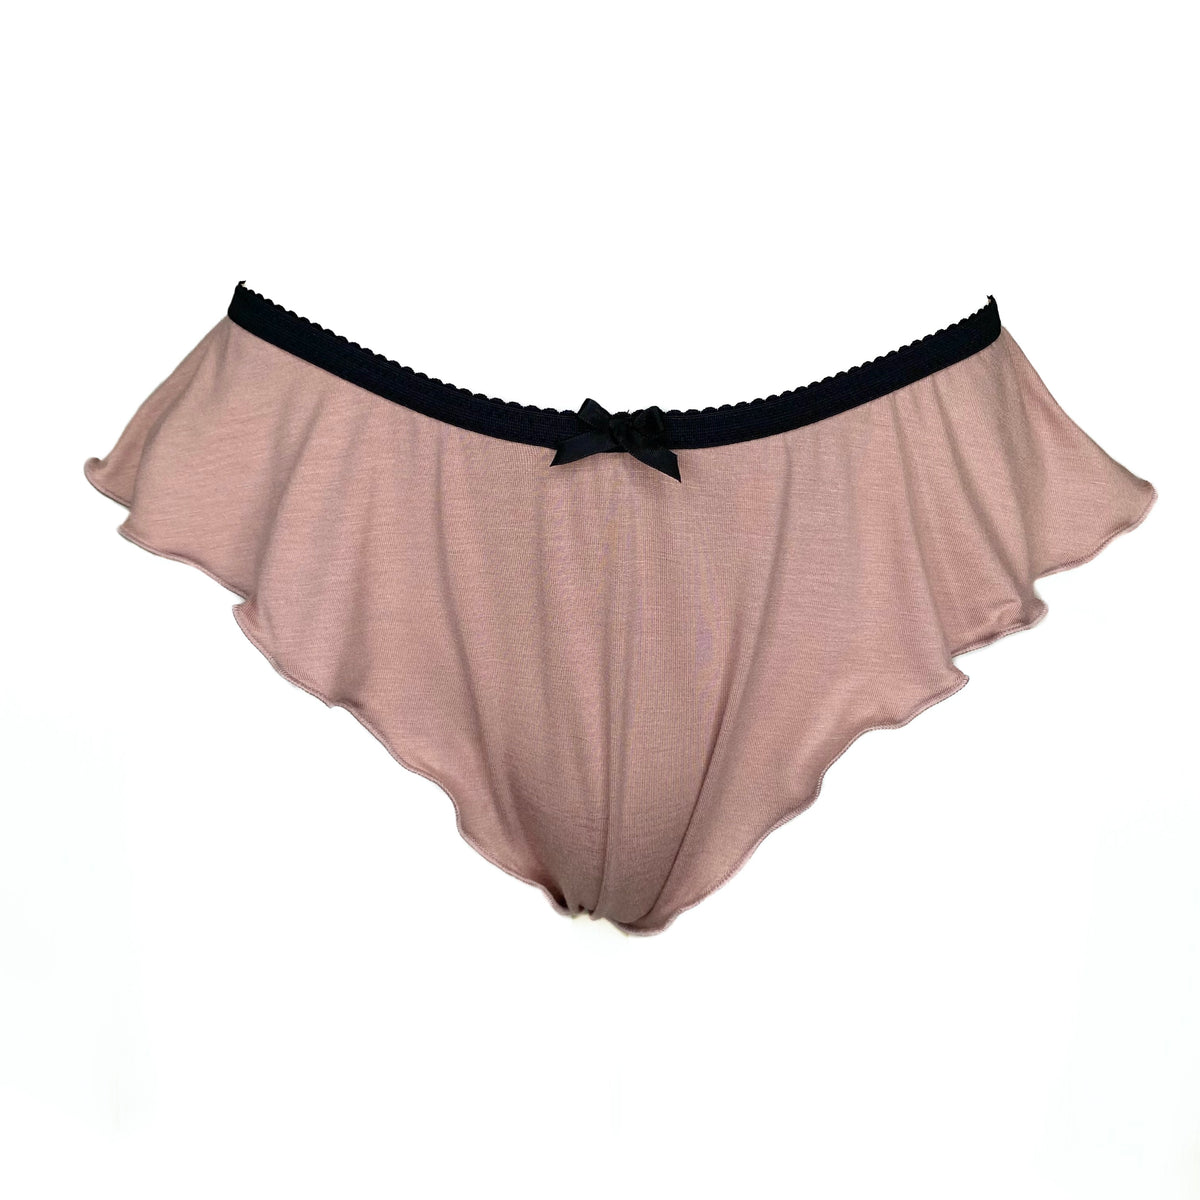 Mini French Knicker - Rose Gold Bamboo